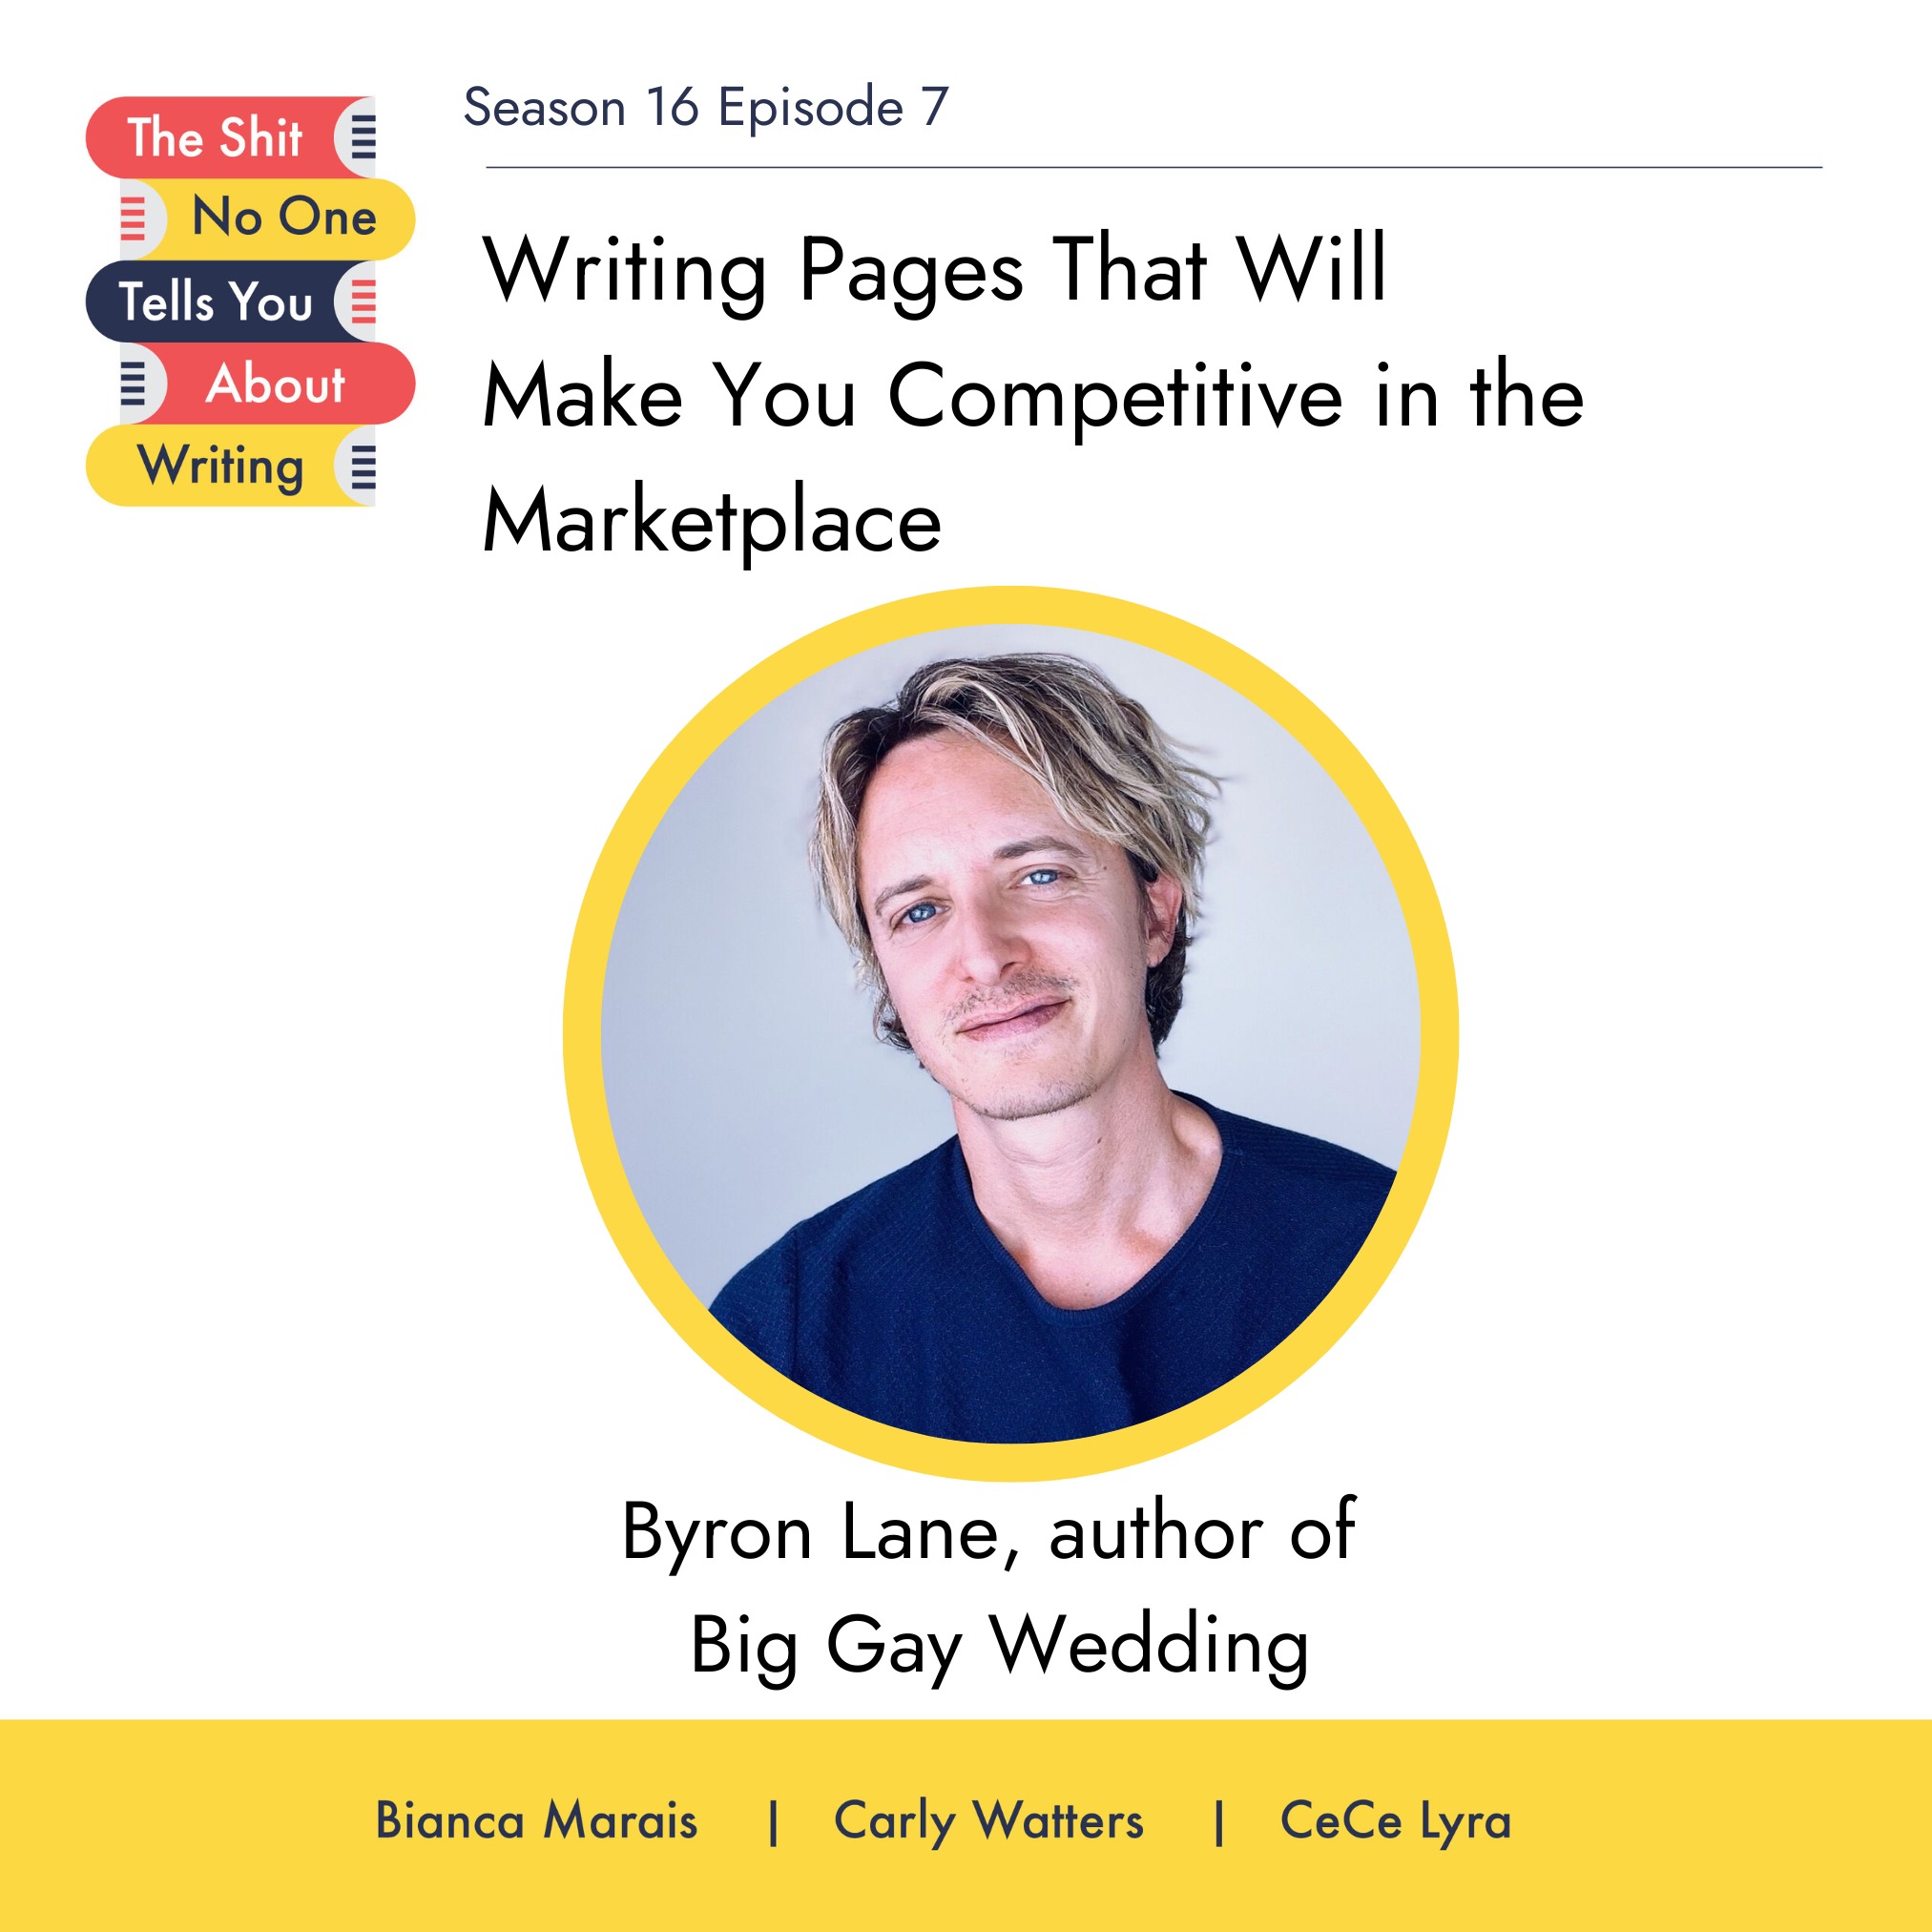 Writing Pages That Will Make You Competitive in the Marketplace